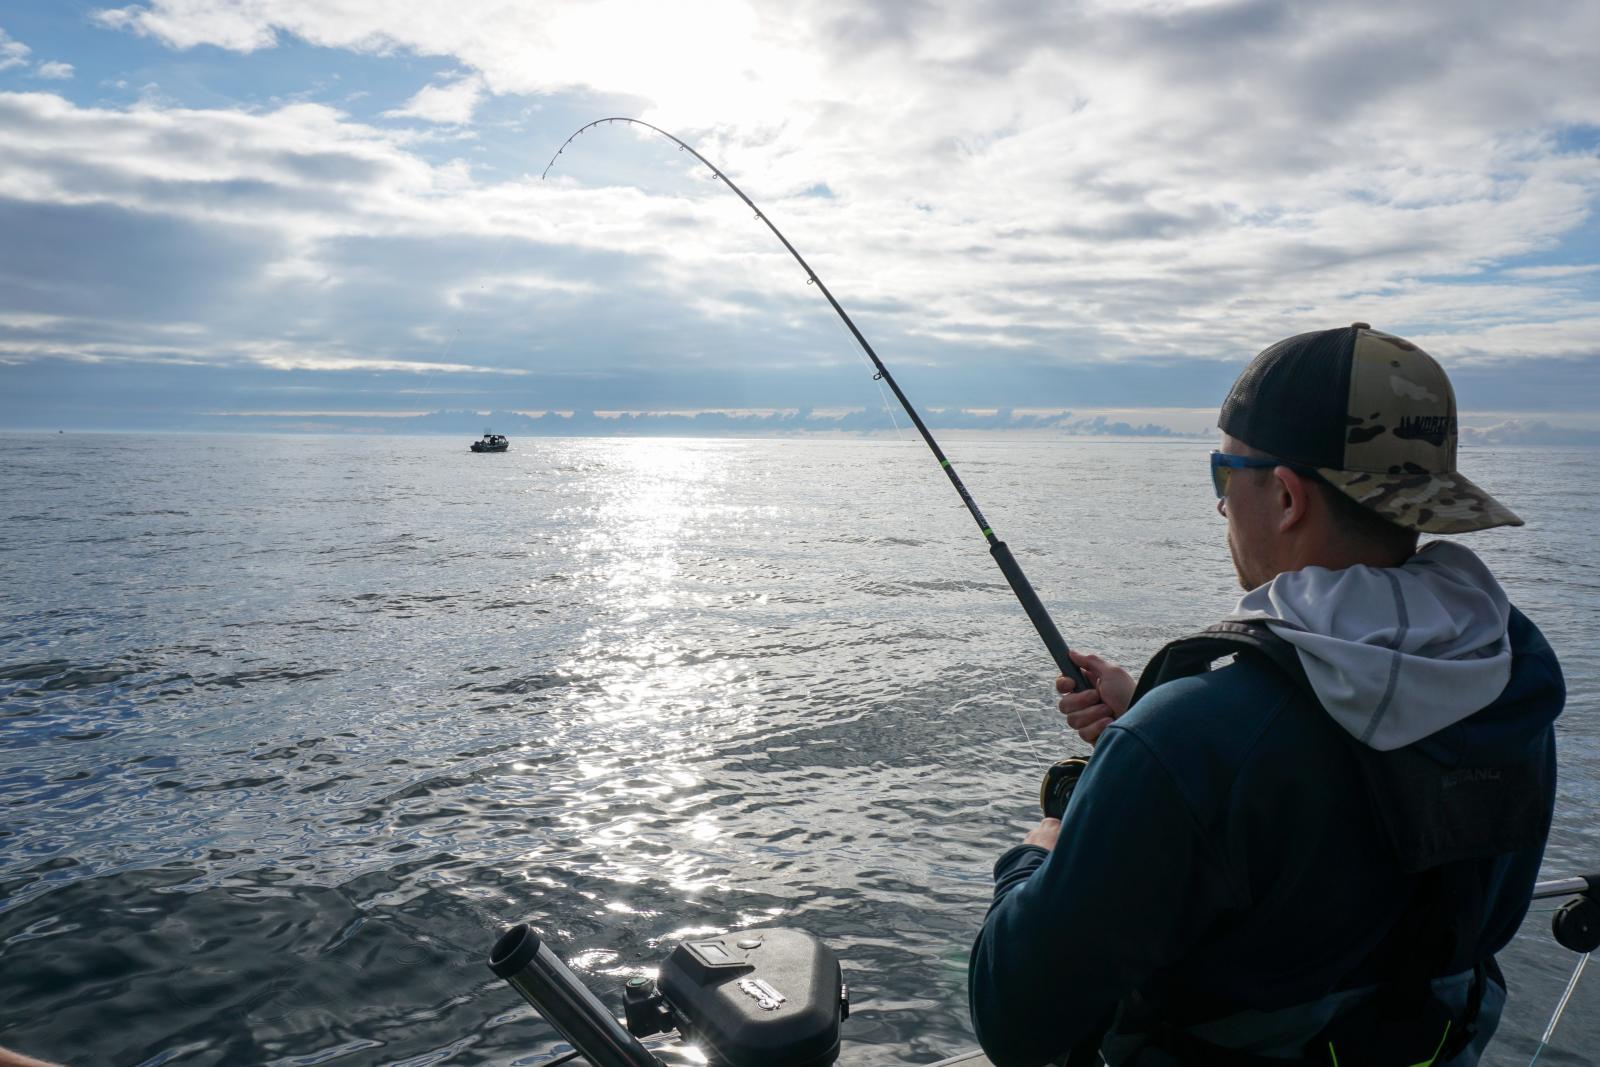 Fishing out of Westport in Marine Area 2 for ocean salmon